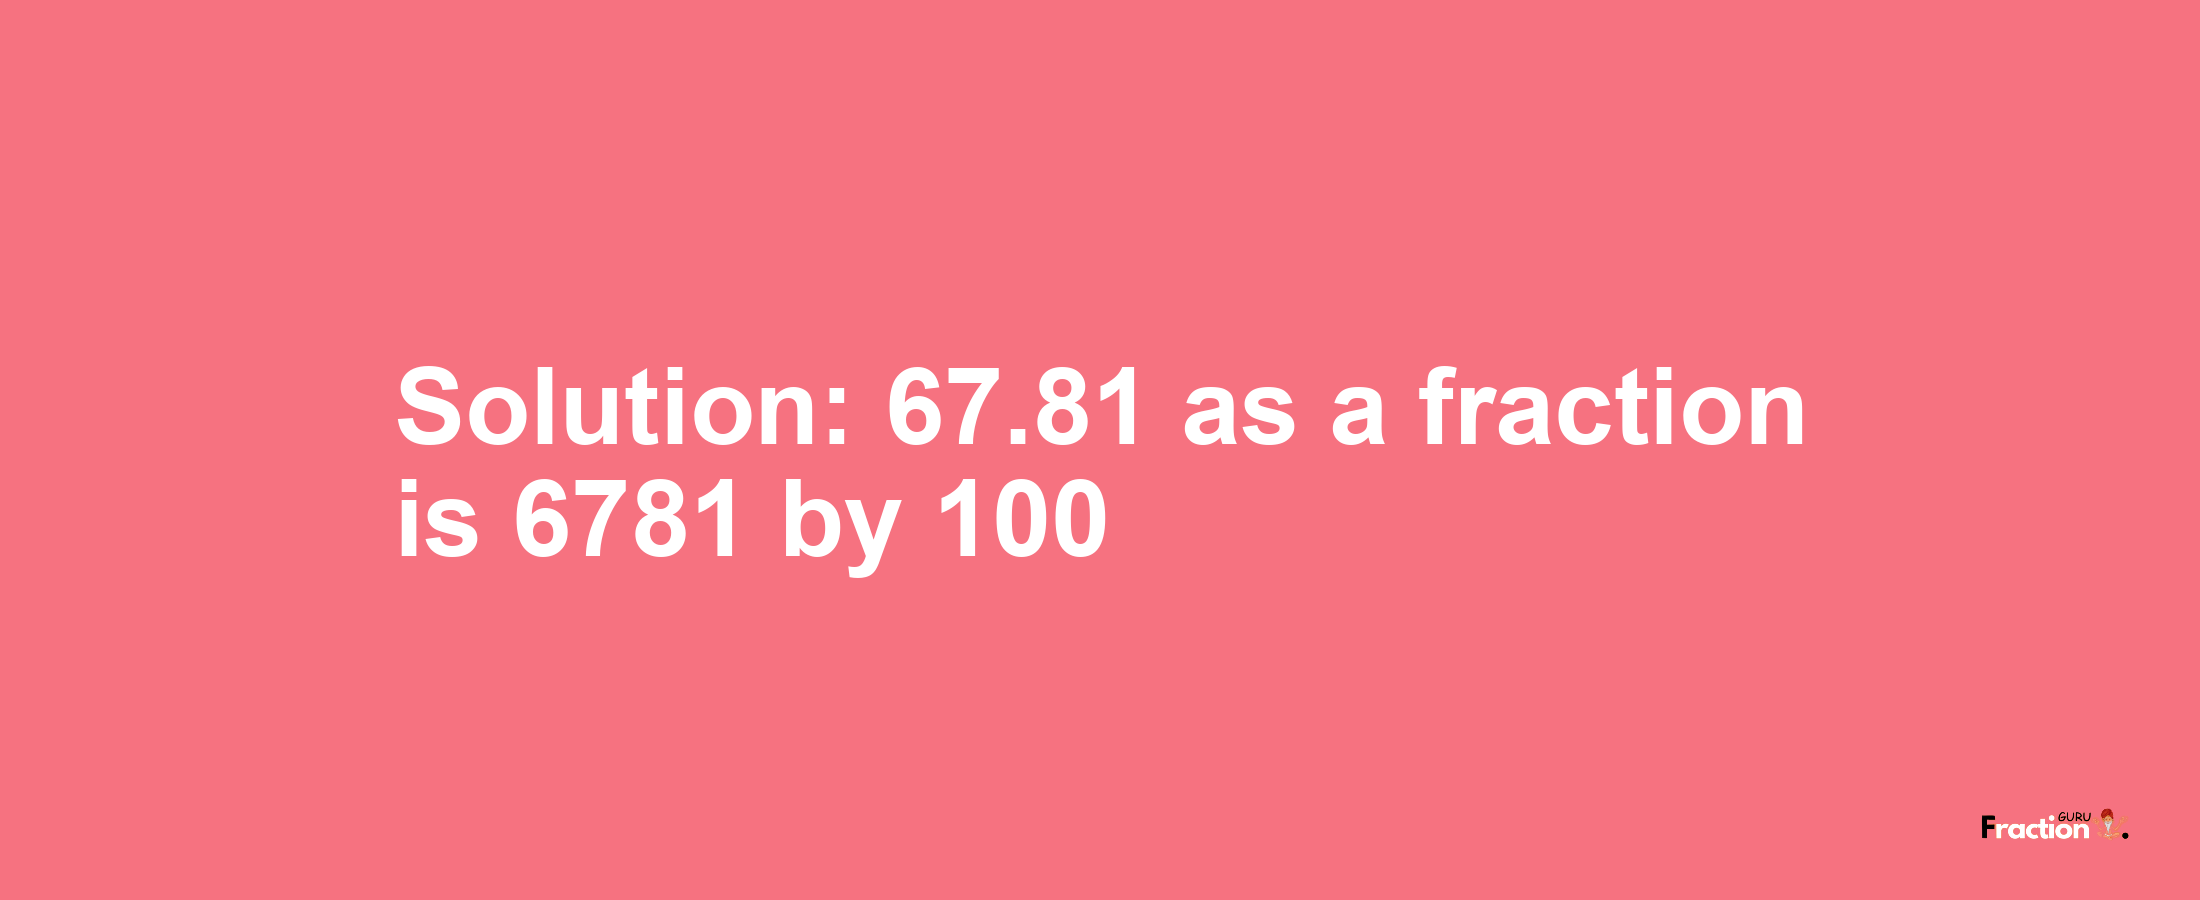 Solution:67.81 as a fraction is 6781/100